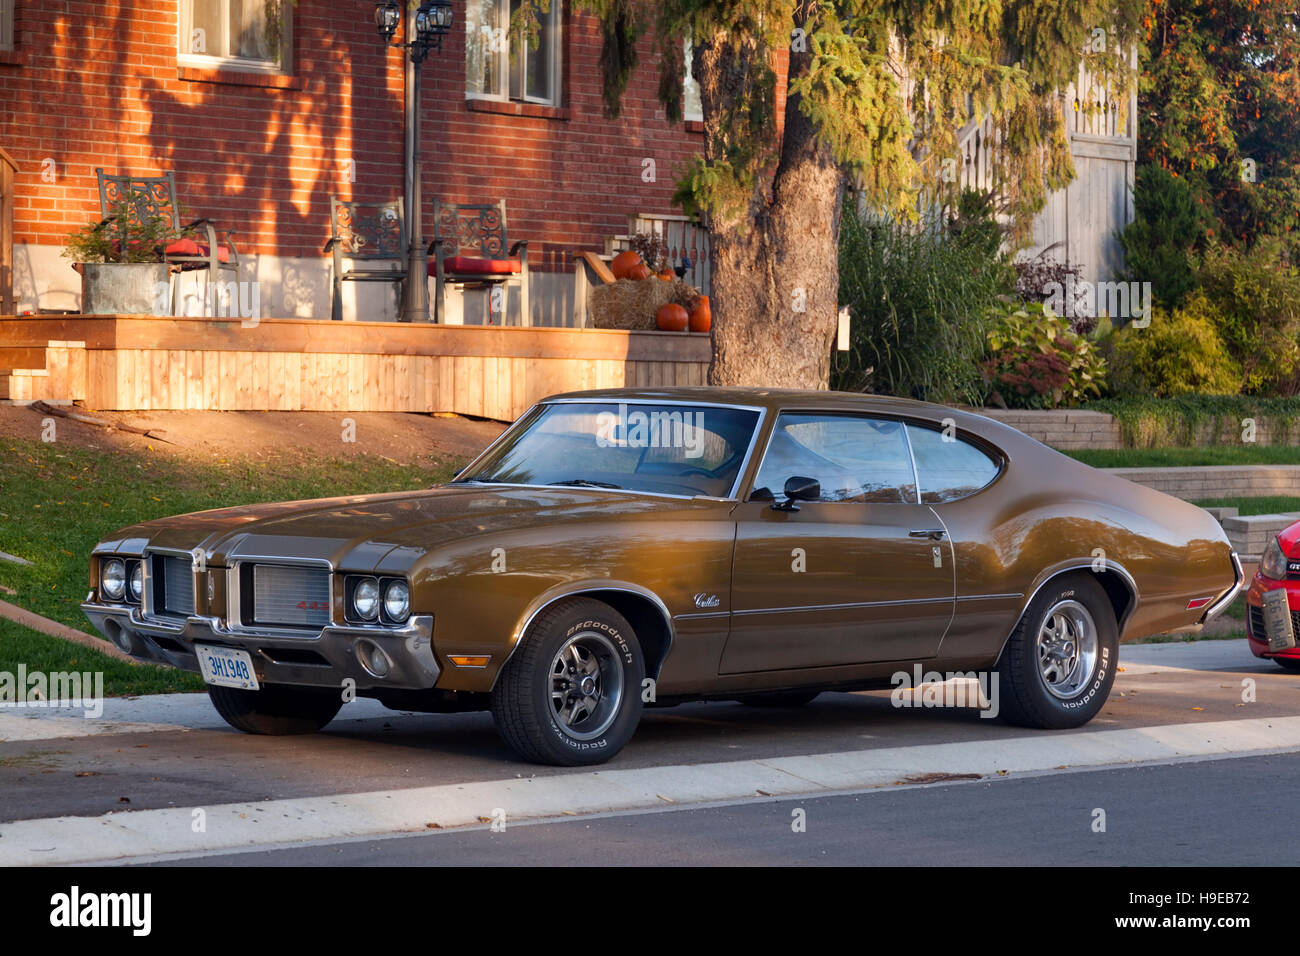 An Oldsmobile 442 muscle car in Paris, Brant County, Ontario, Canada. Stock Photo